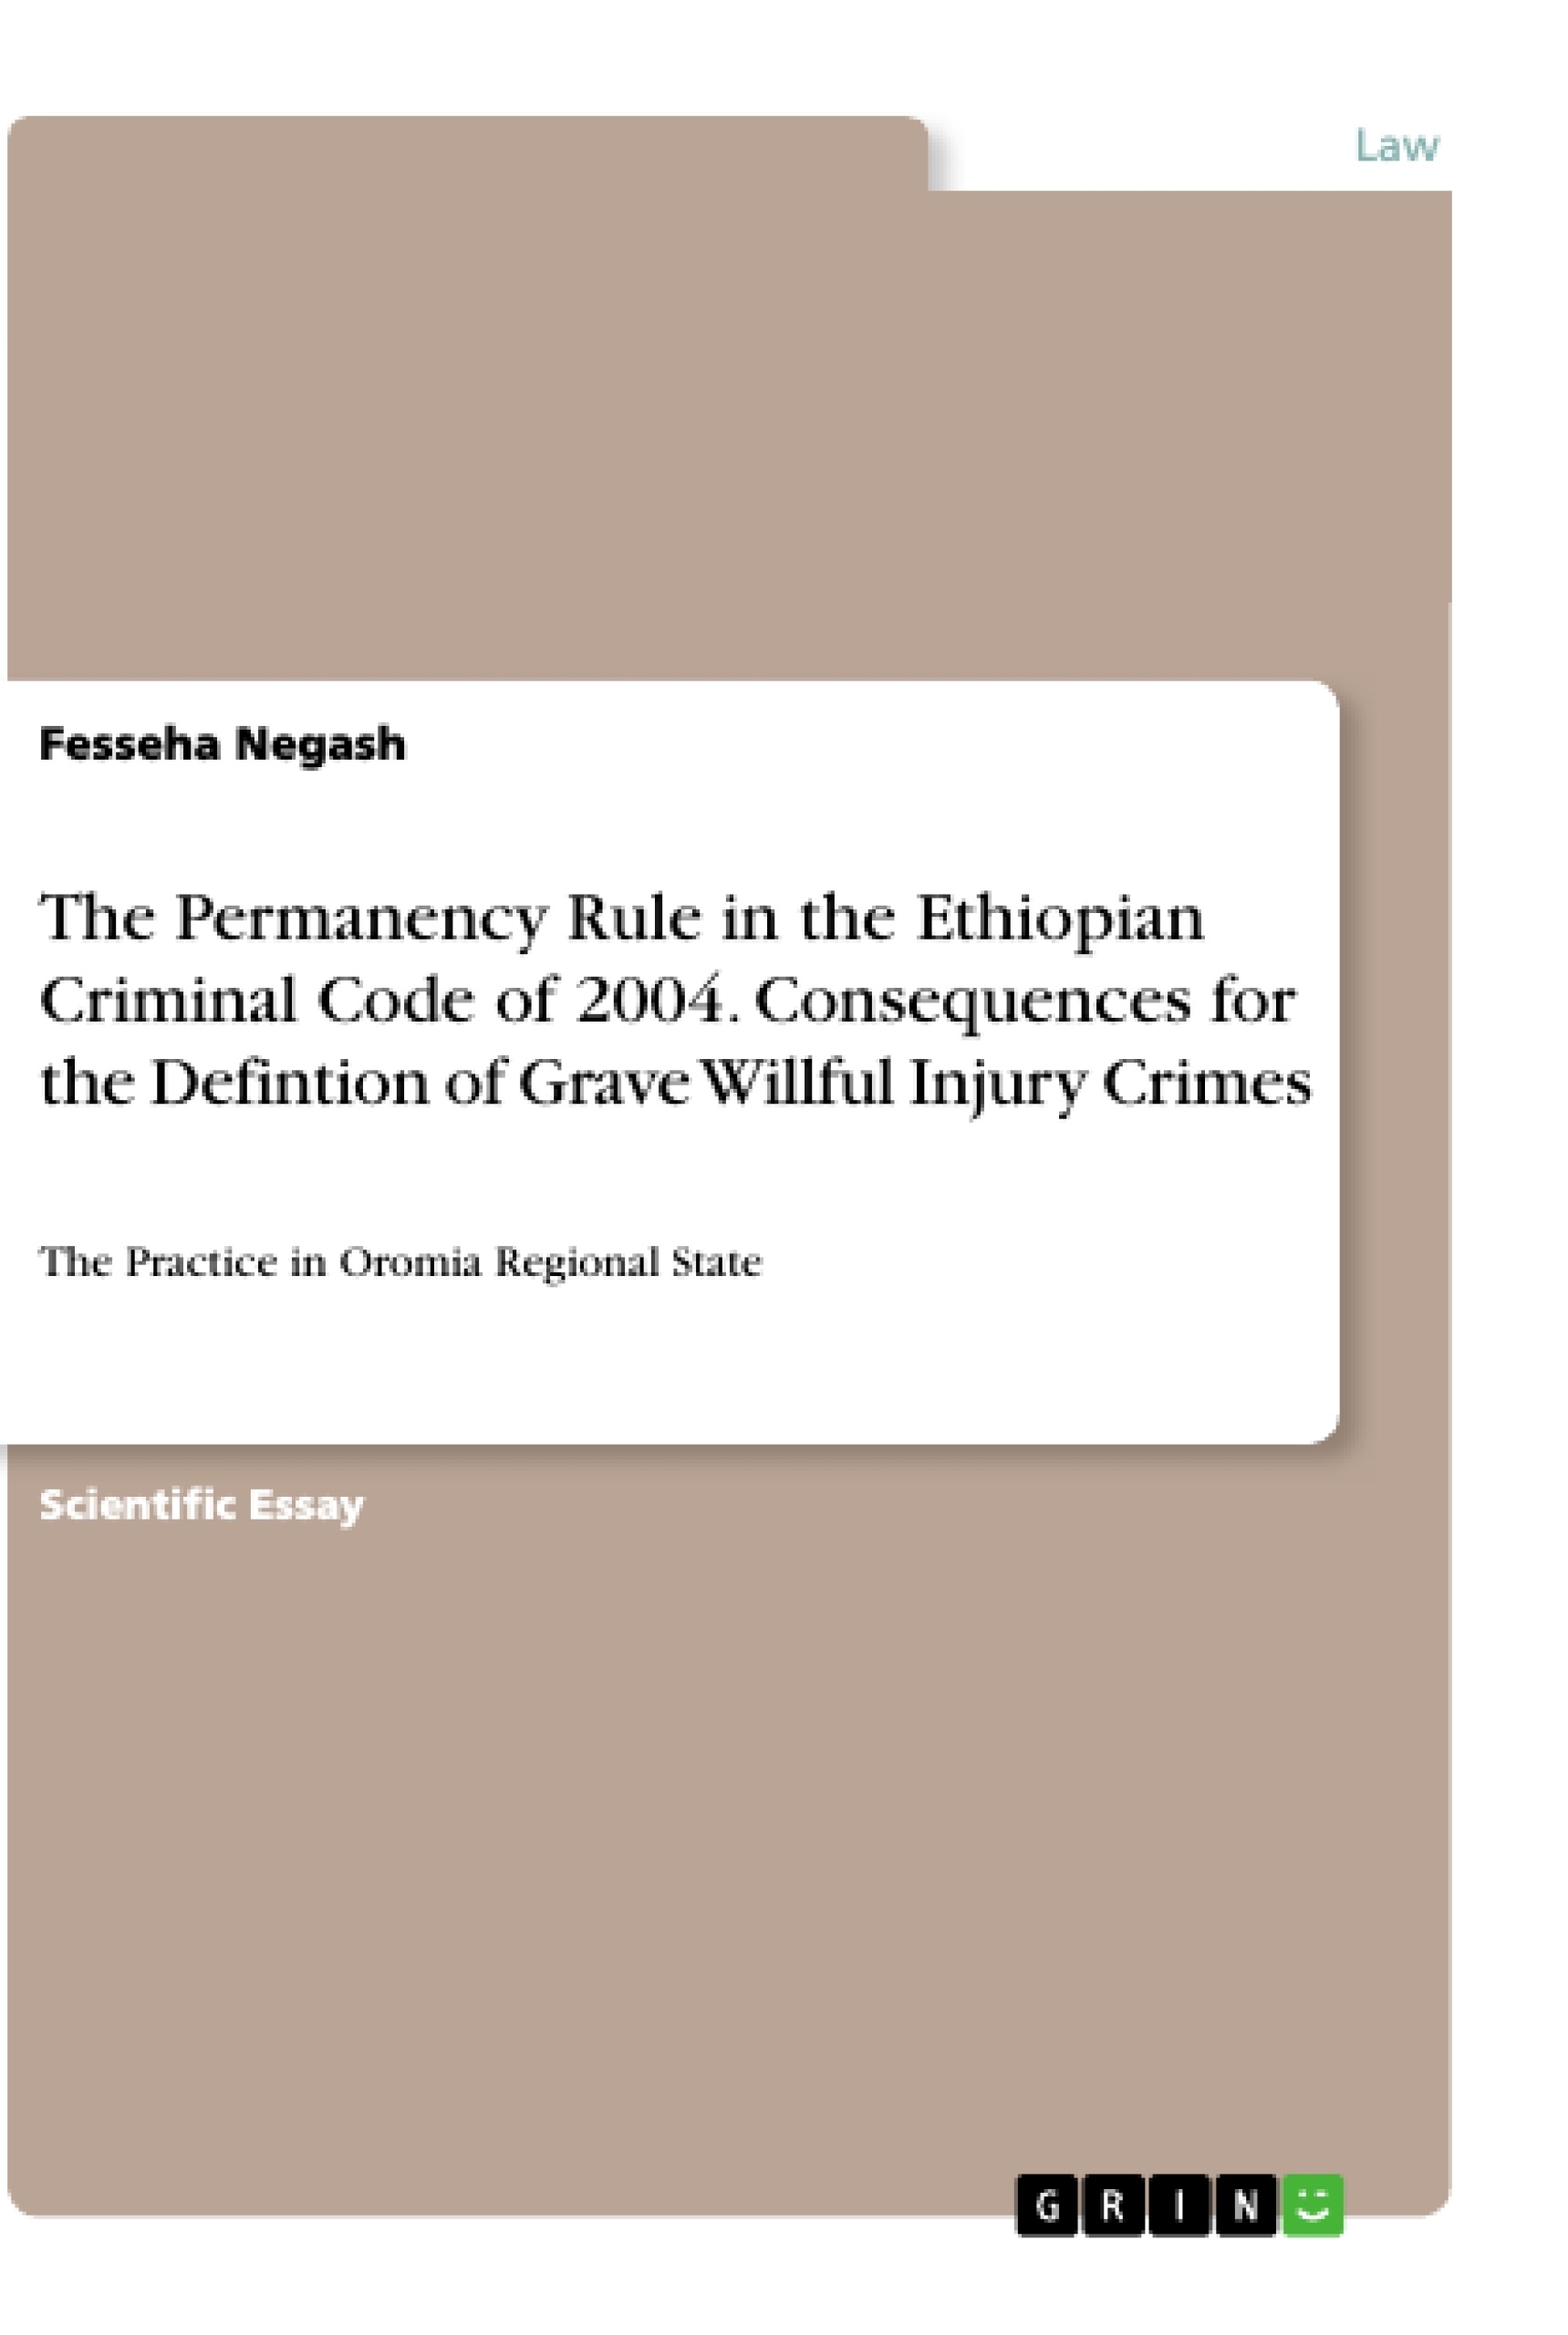 Title: The Permanency Rule in the Ethiopian Criminal Code of 2004. Consequences for the Defintion of Grave Willful Injury Crimes